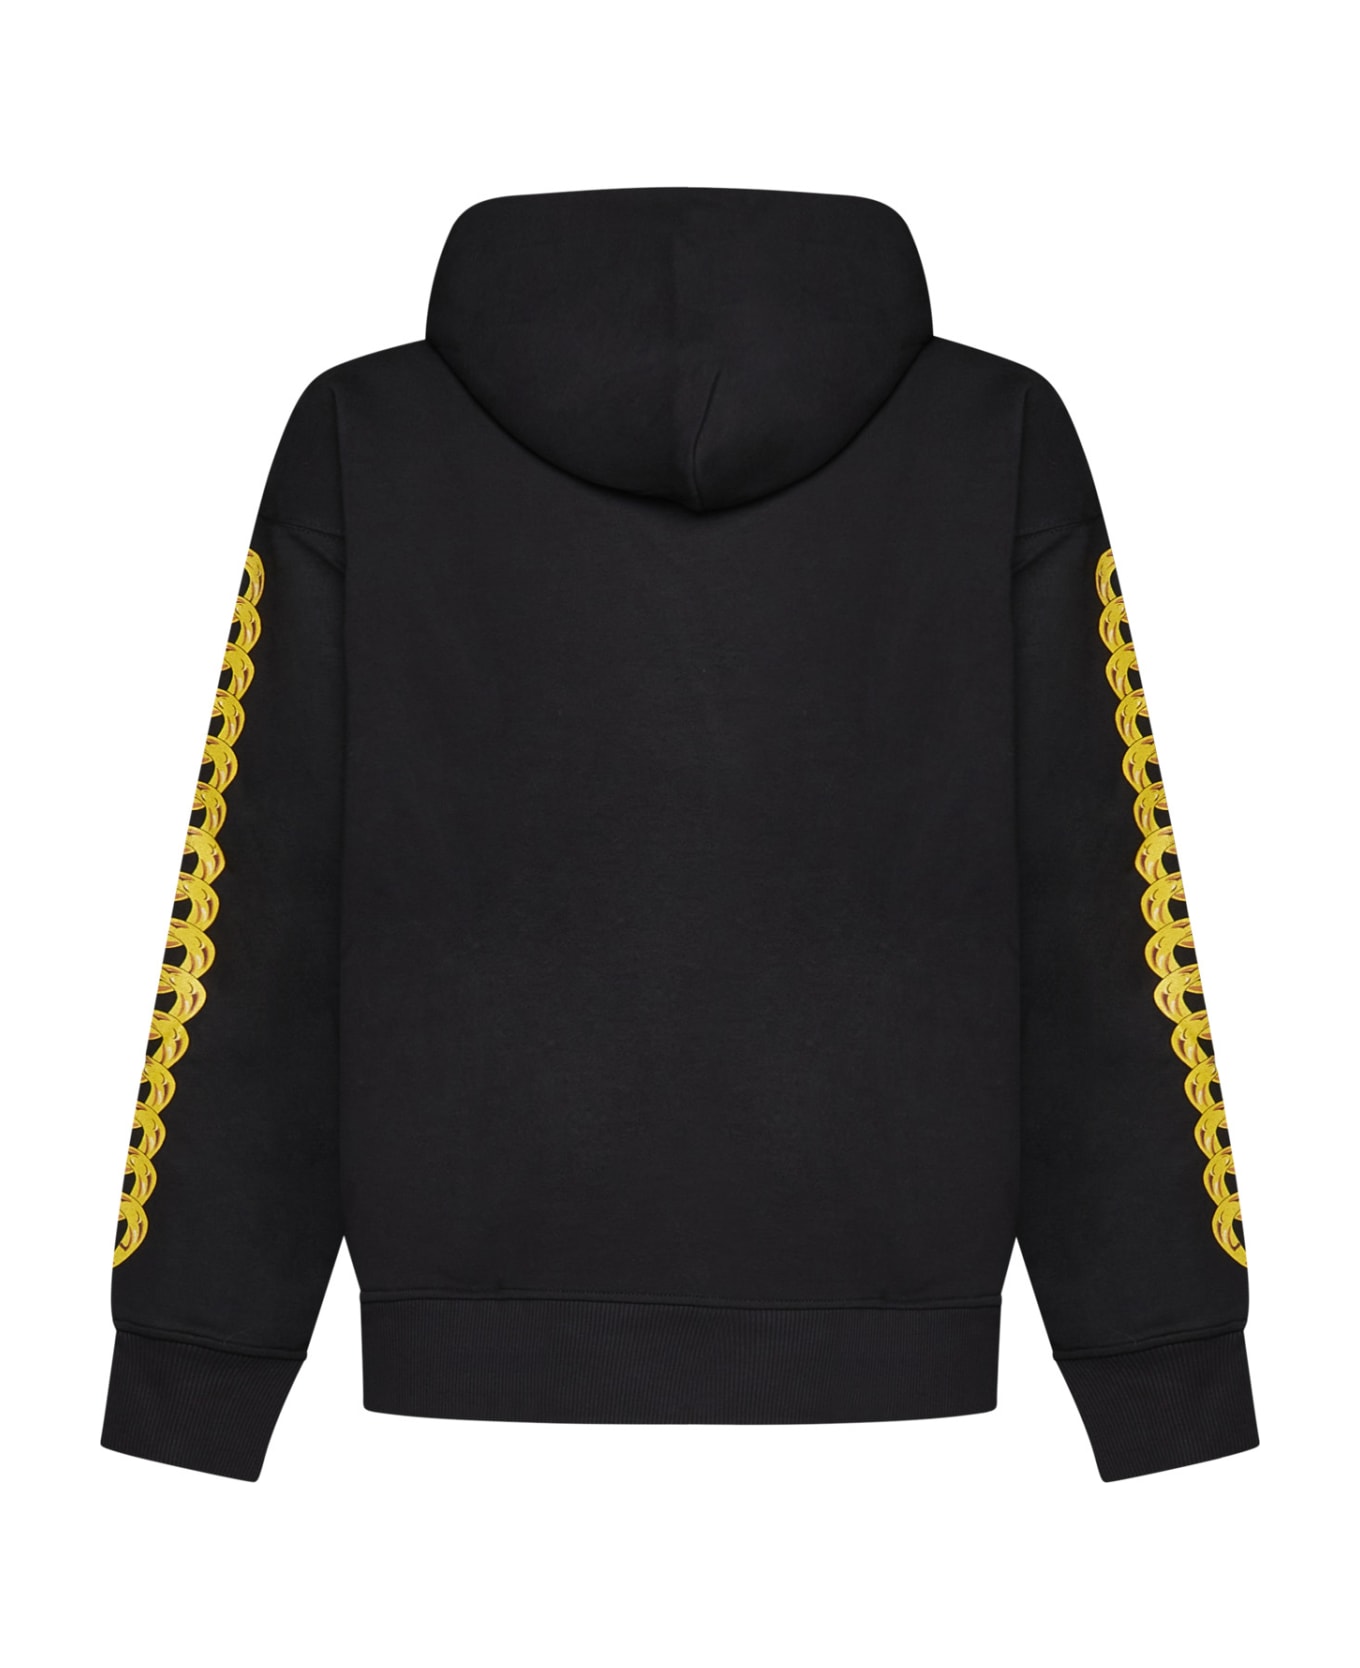 Versace Jeans Couture Chain Logo Hoodie - Black gold